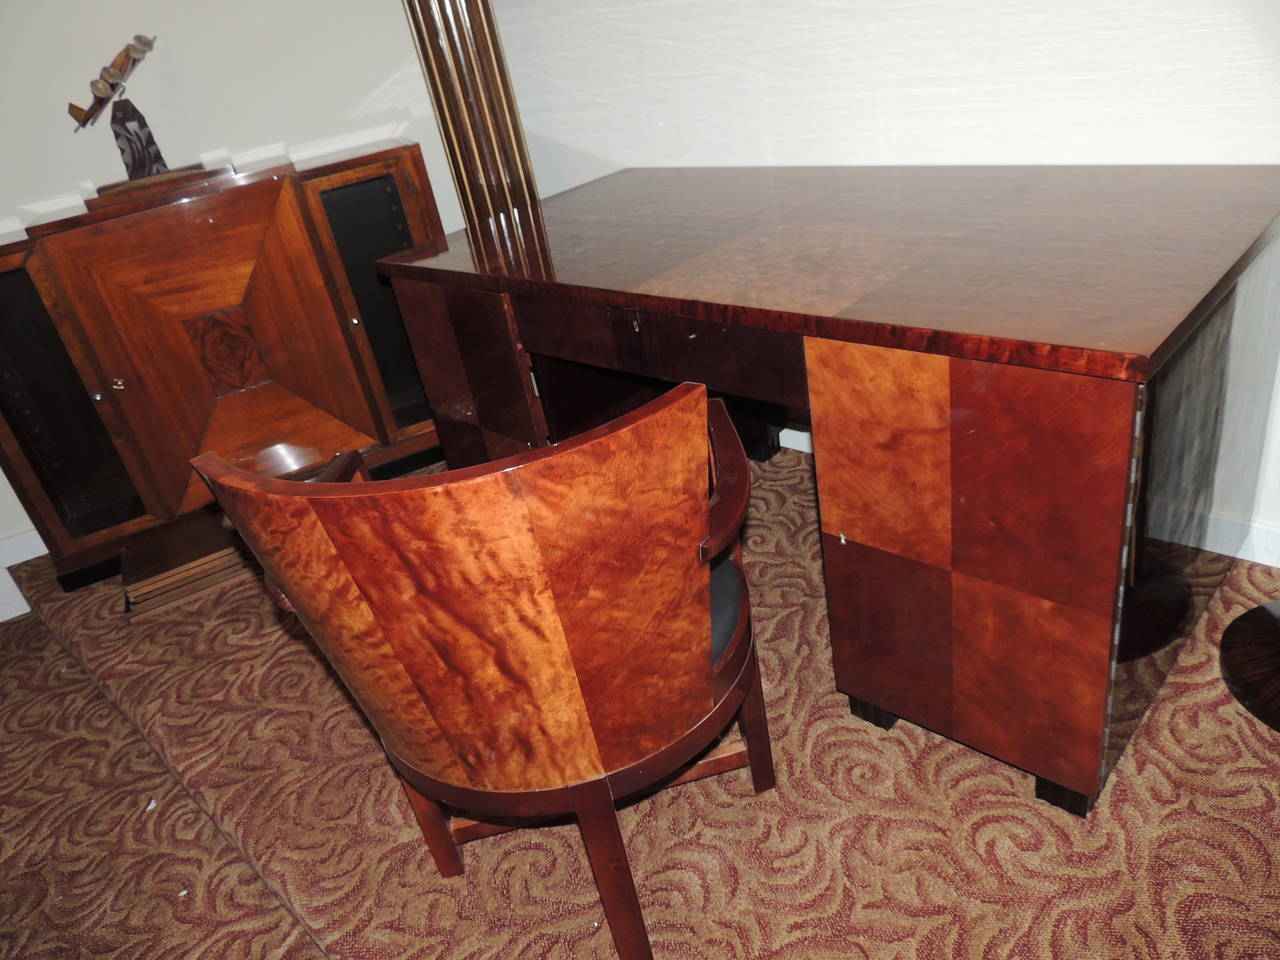 Spectacular four-piece Art Deco mahogany desk suite in beautiful condition. Sleek, elegant, important and powerful, these four matched pieces will instantly transform your office decor. The desk makes inventive use of checkerboard veneer showcasing